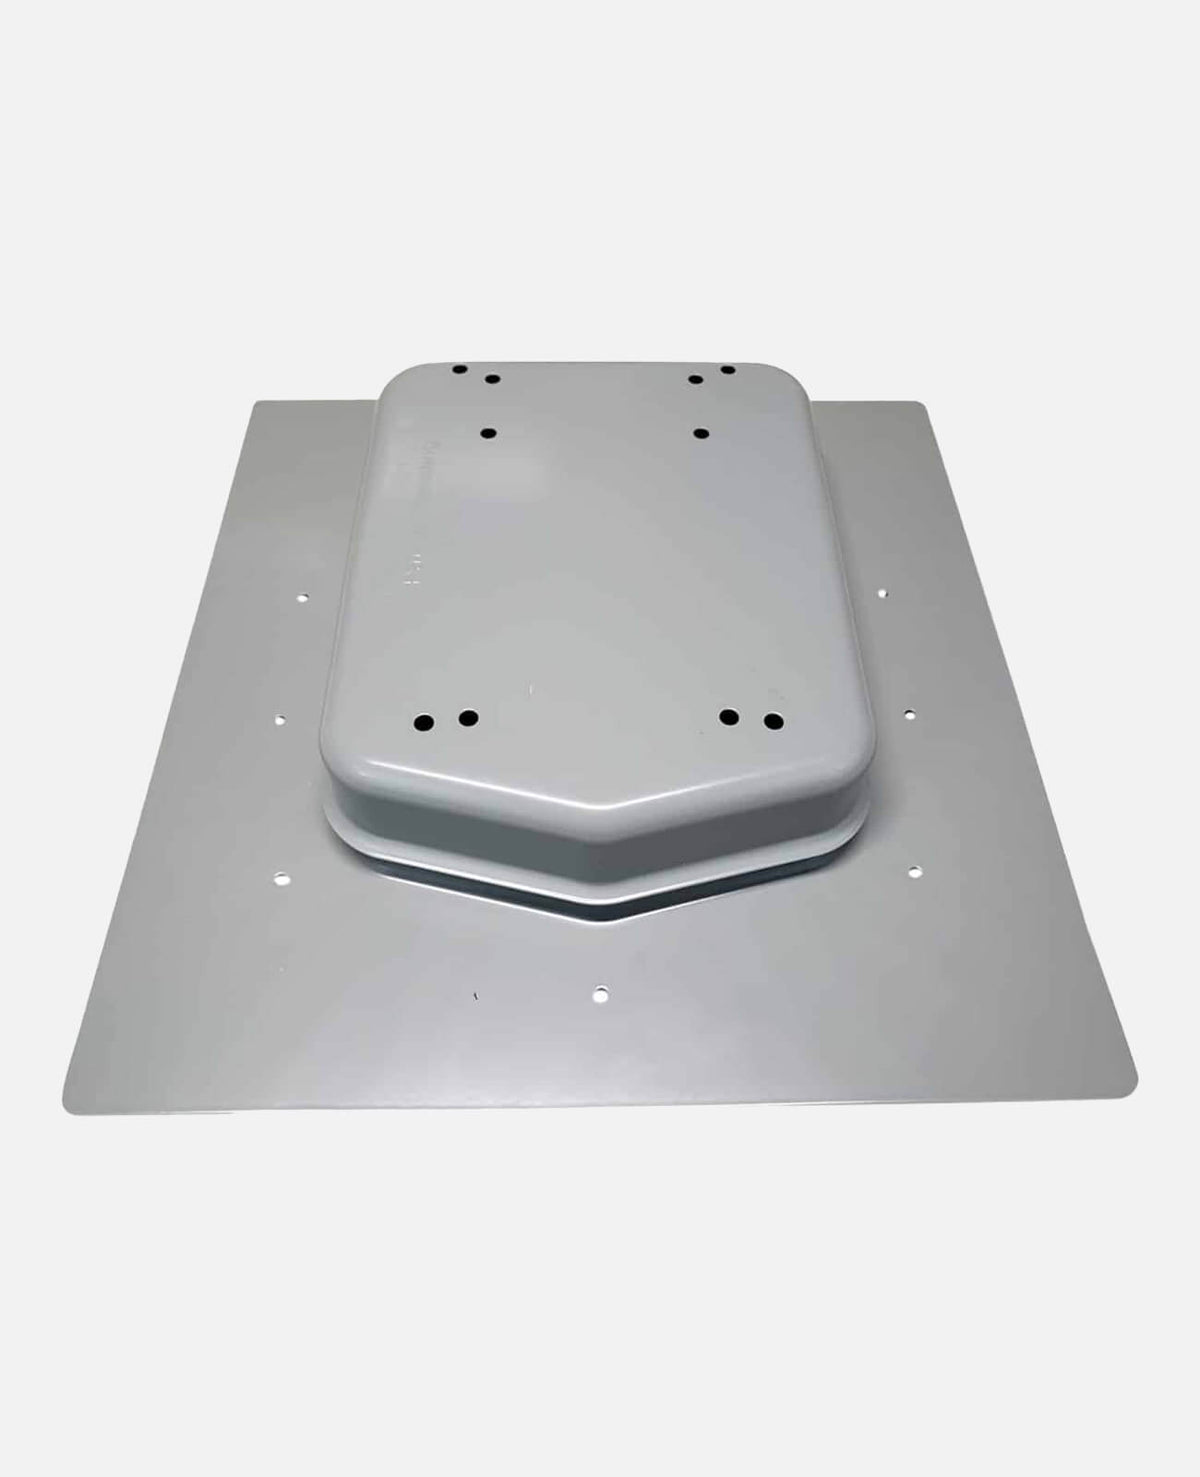 Commdeck Antenna Mounting System, Primer Grey (Model 0173 GRY)